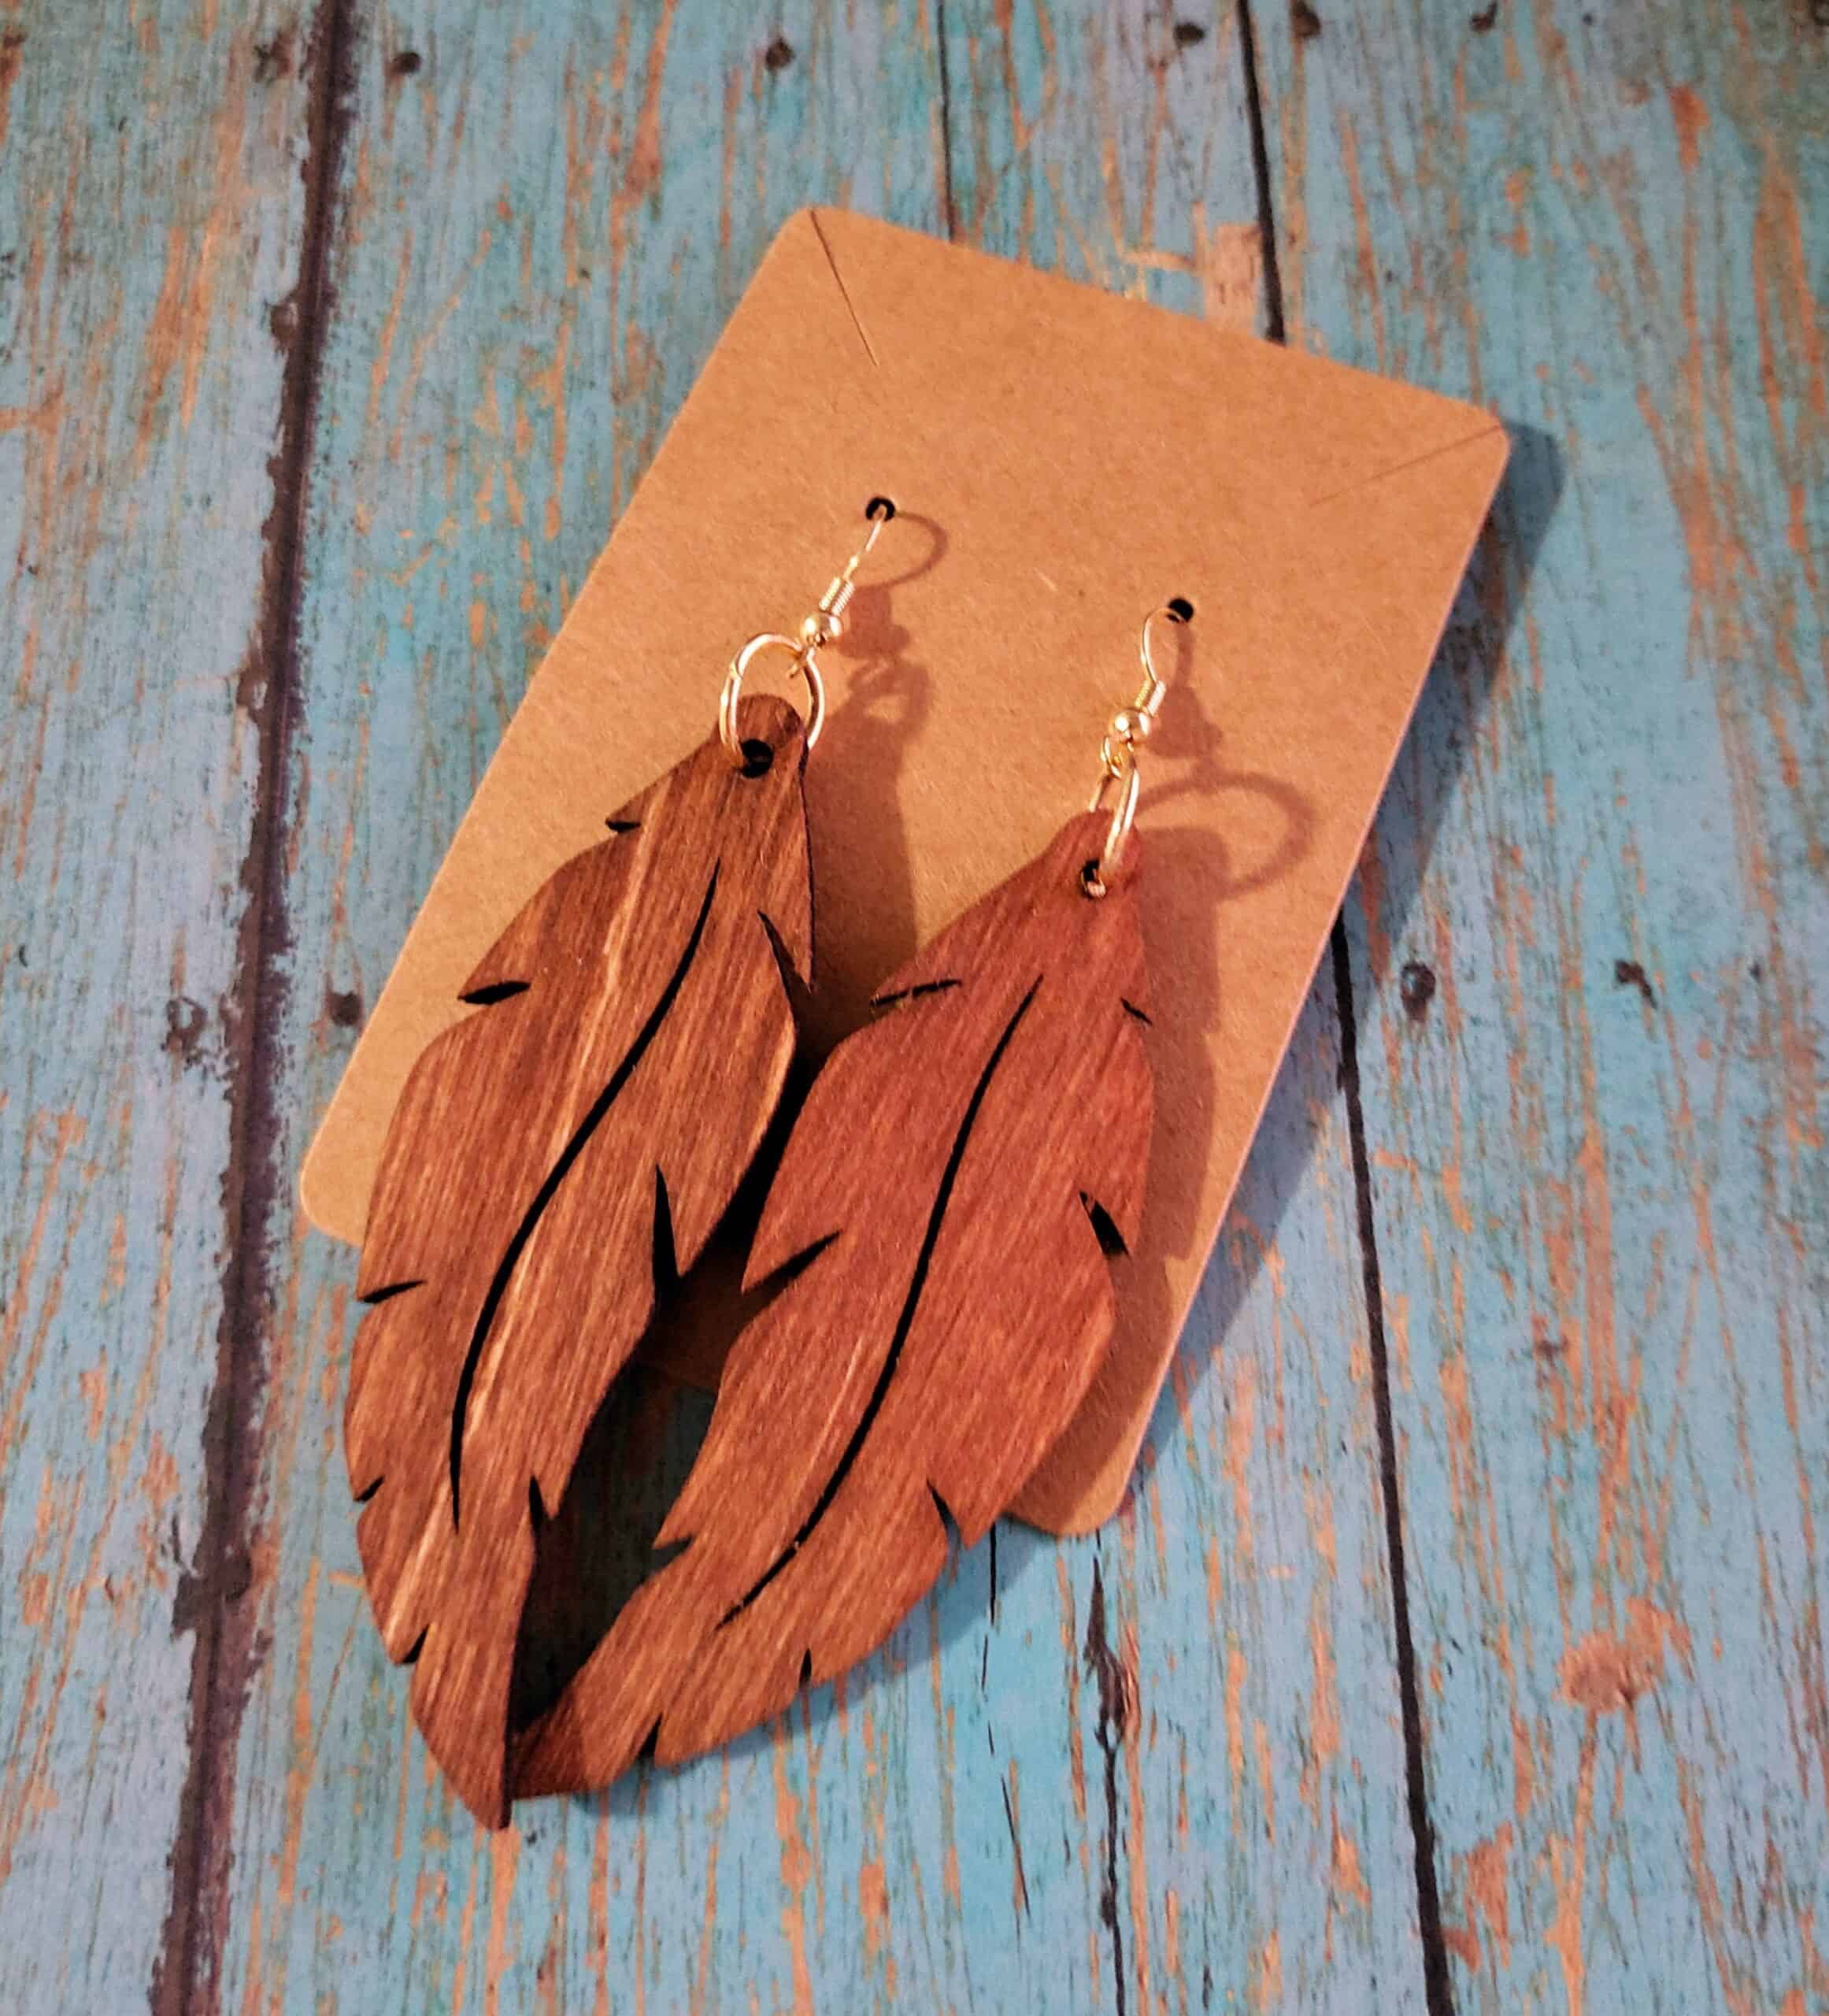 Handmade Wooden Earrings Online Gifts - Wood4home - Wooden Jewelry,  Souvenirs, Furnishings